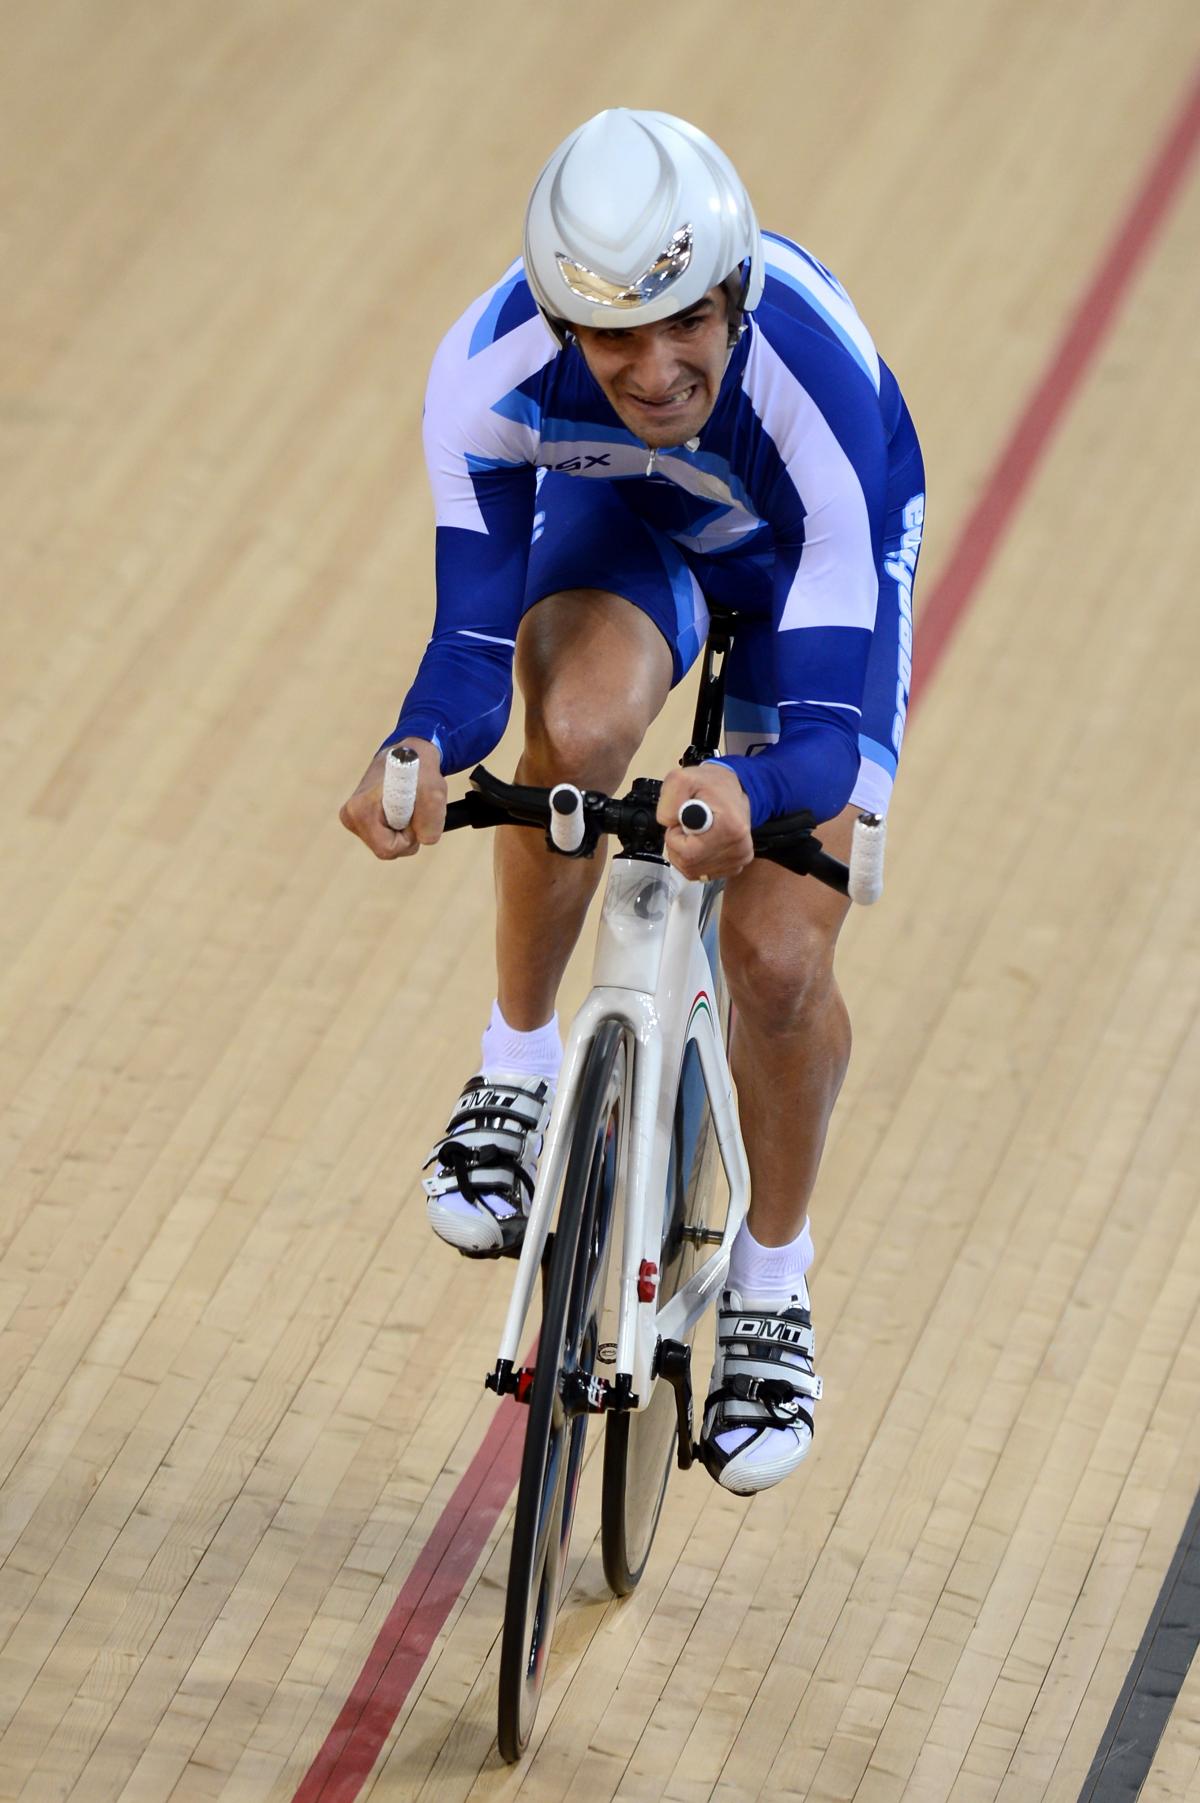 A man cycles straight ahead on a track.